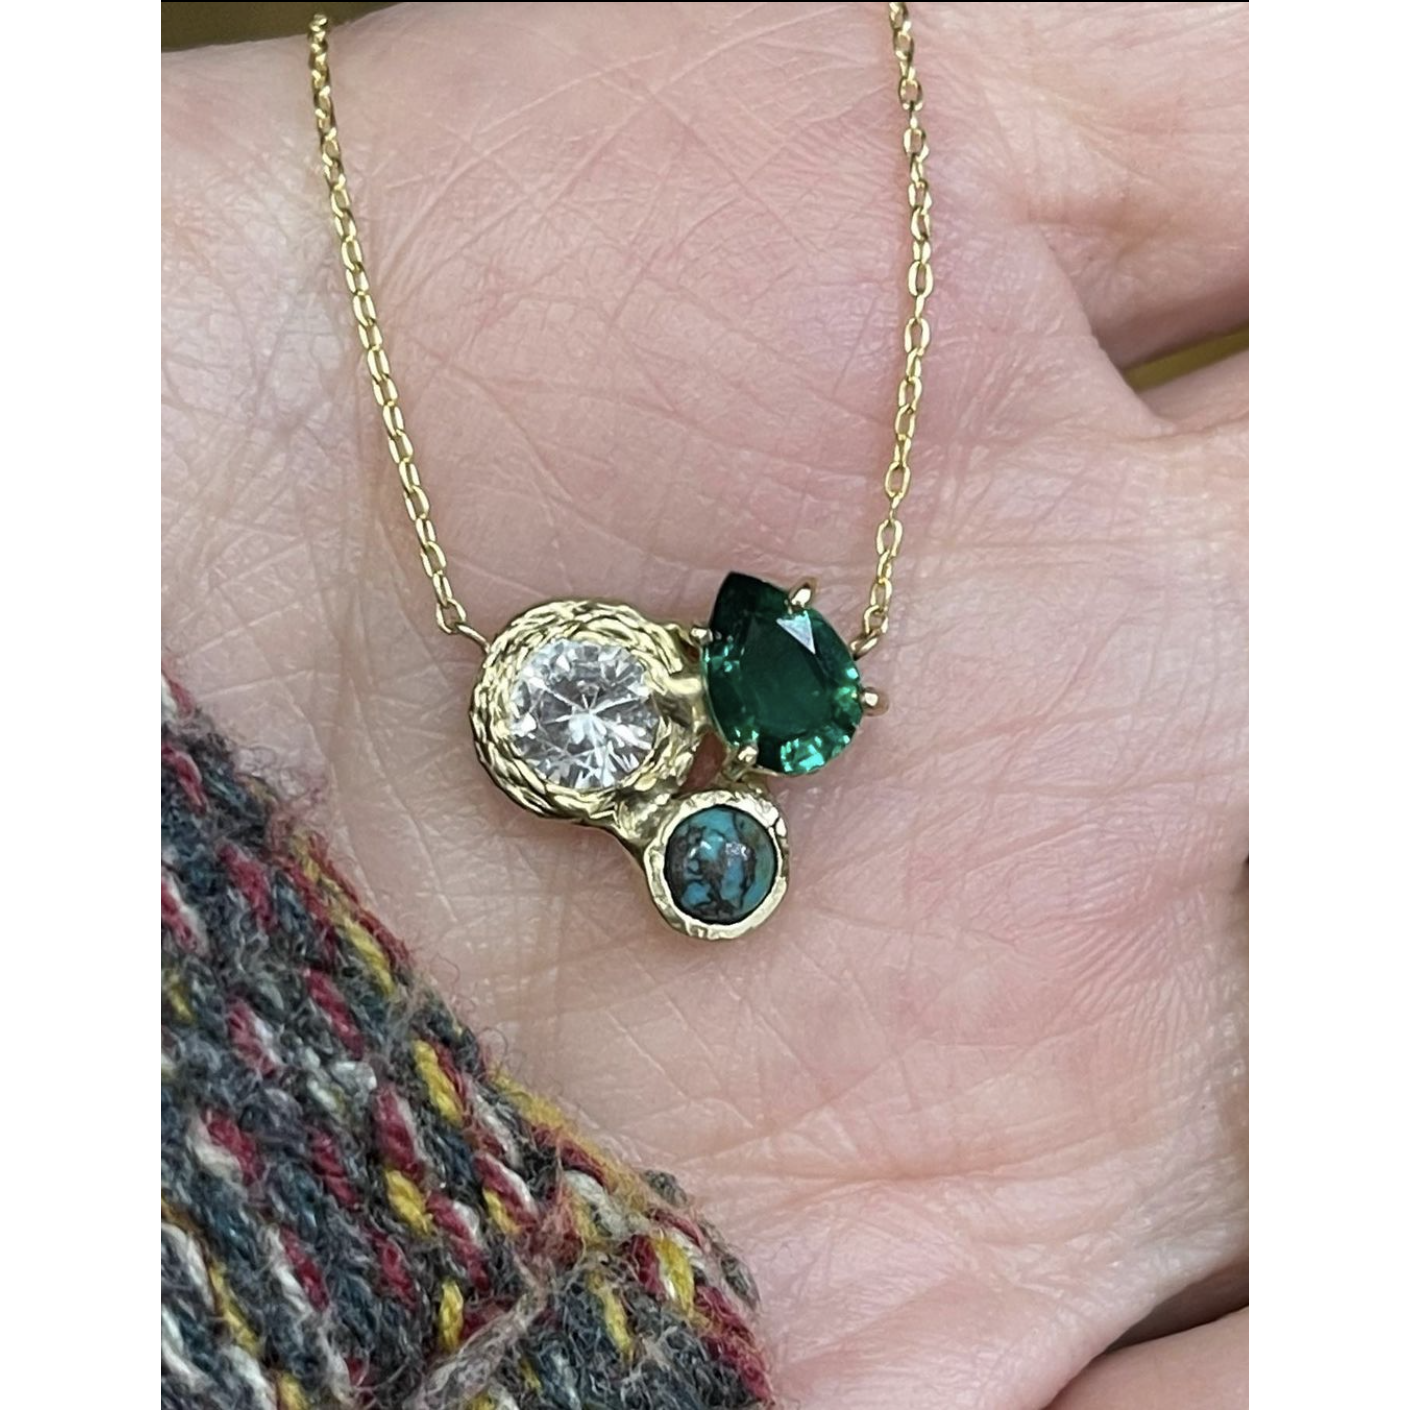 14k Gold Necklace with White Sapphire, Turquoise + Emerald Cluster Pendant